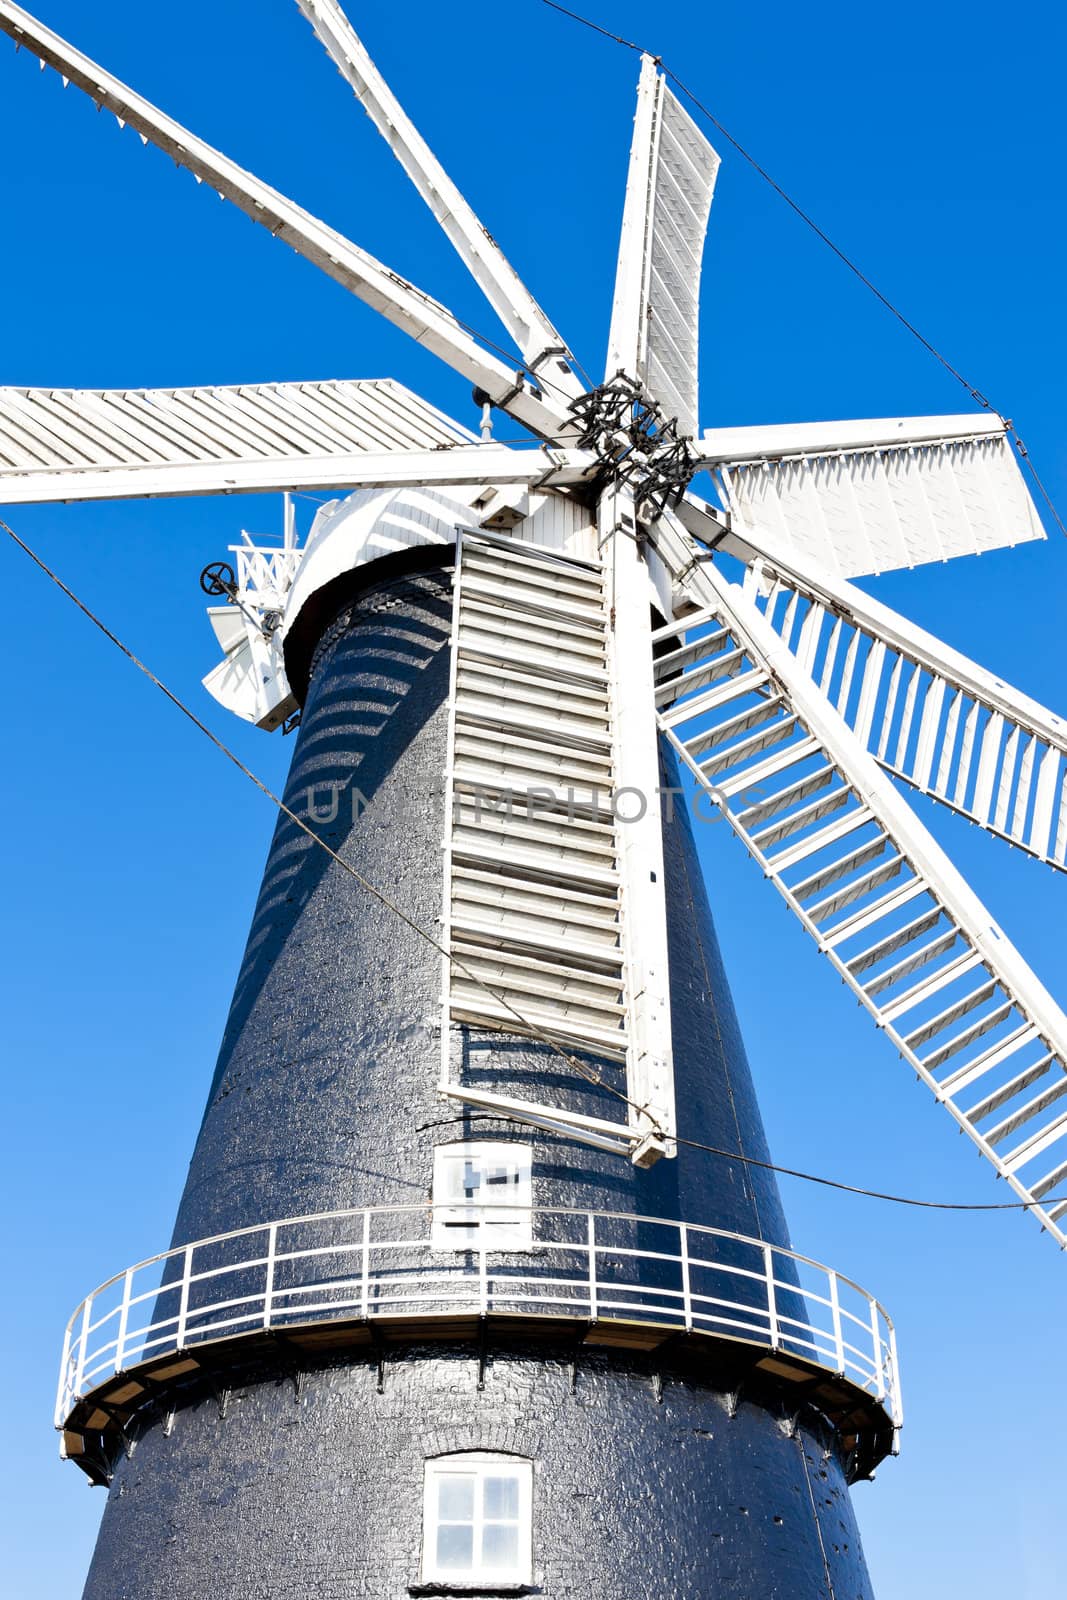 windmill in Heckington, East Midlands, England by phbcz